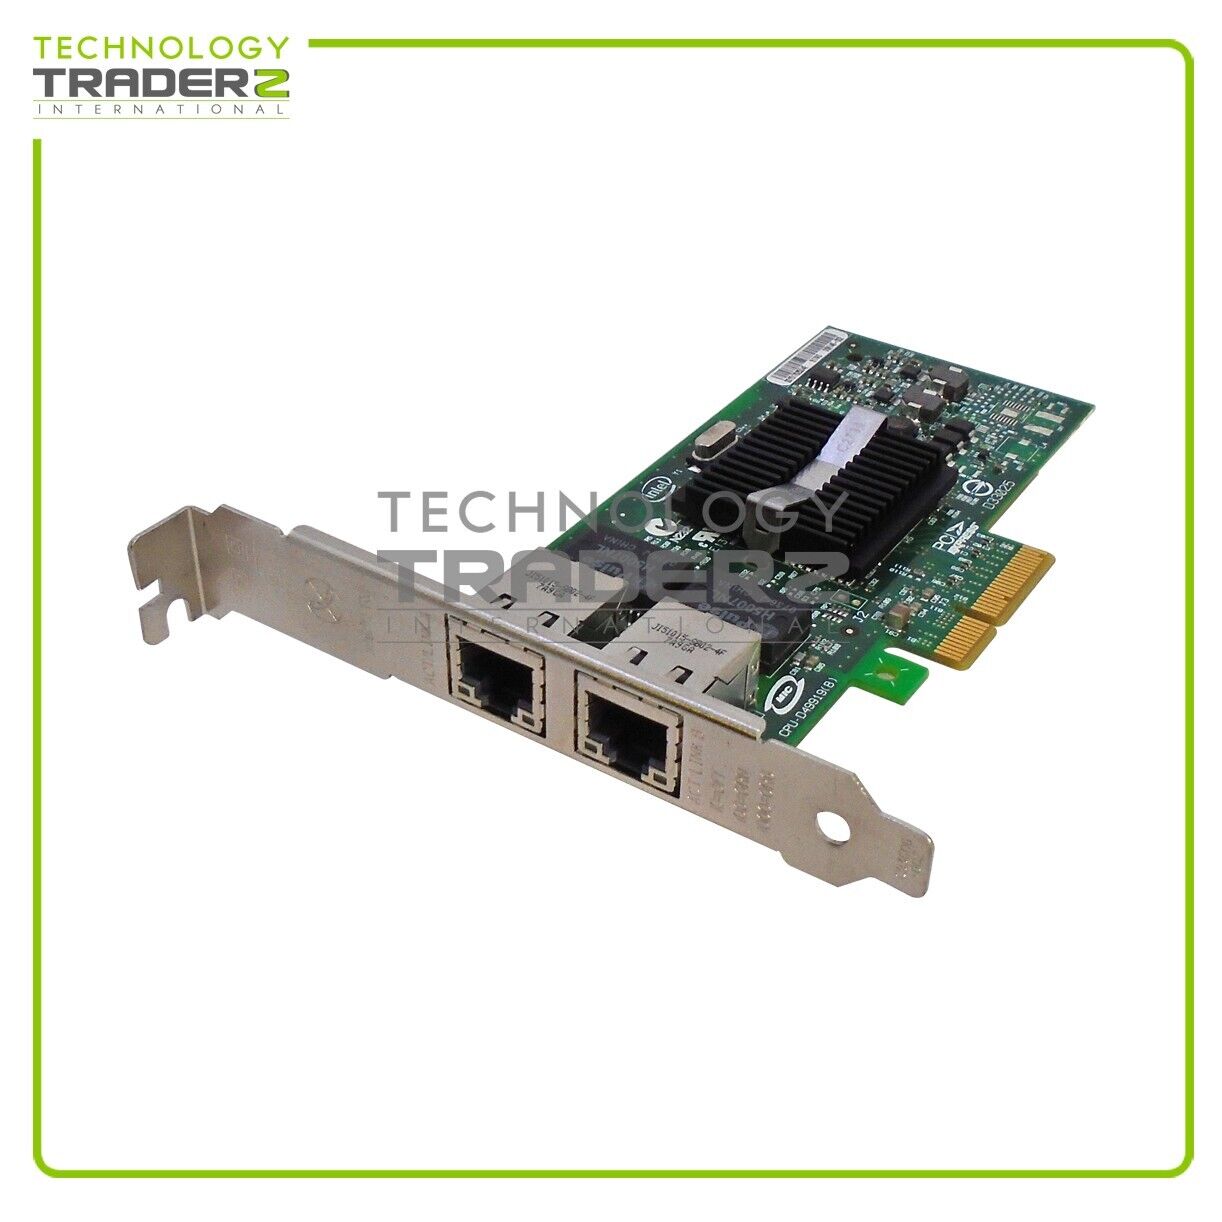 39Y6127 IBM Dual Port 1Gbps FC PCI-E Network Adapter 39Y6128 G32987 D56146-004